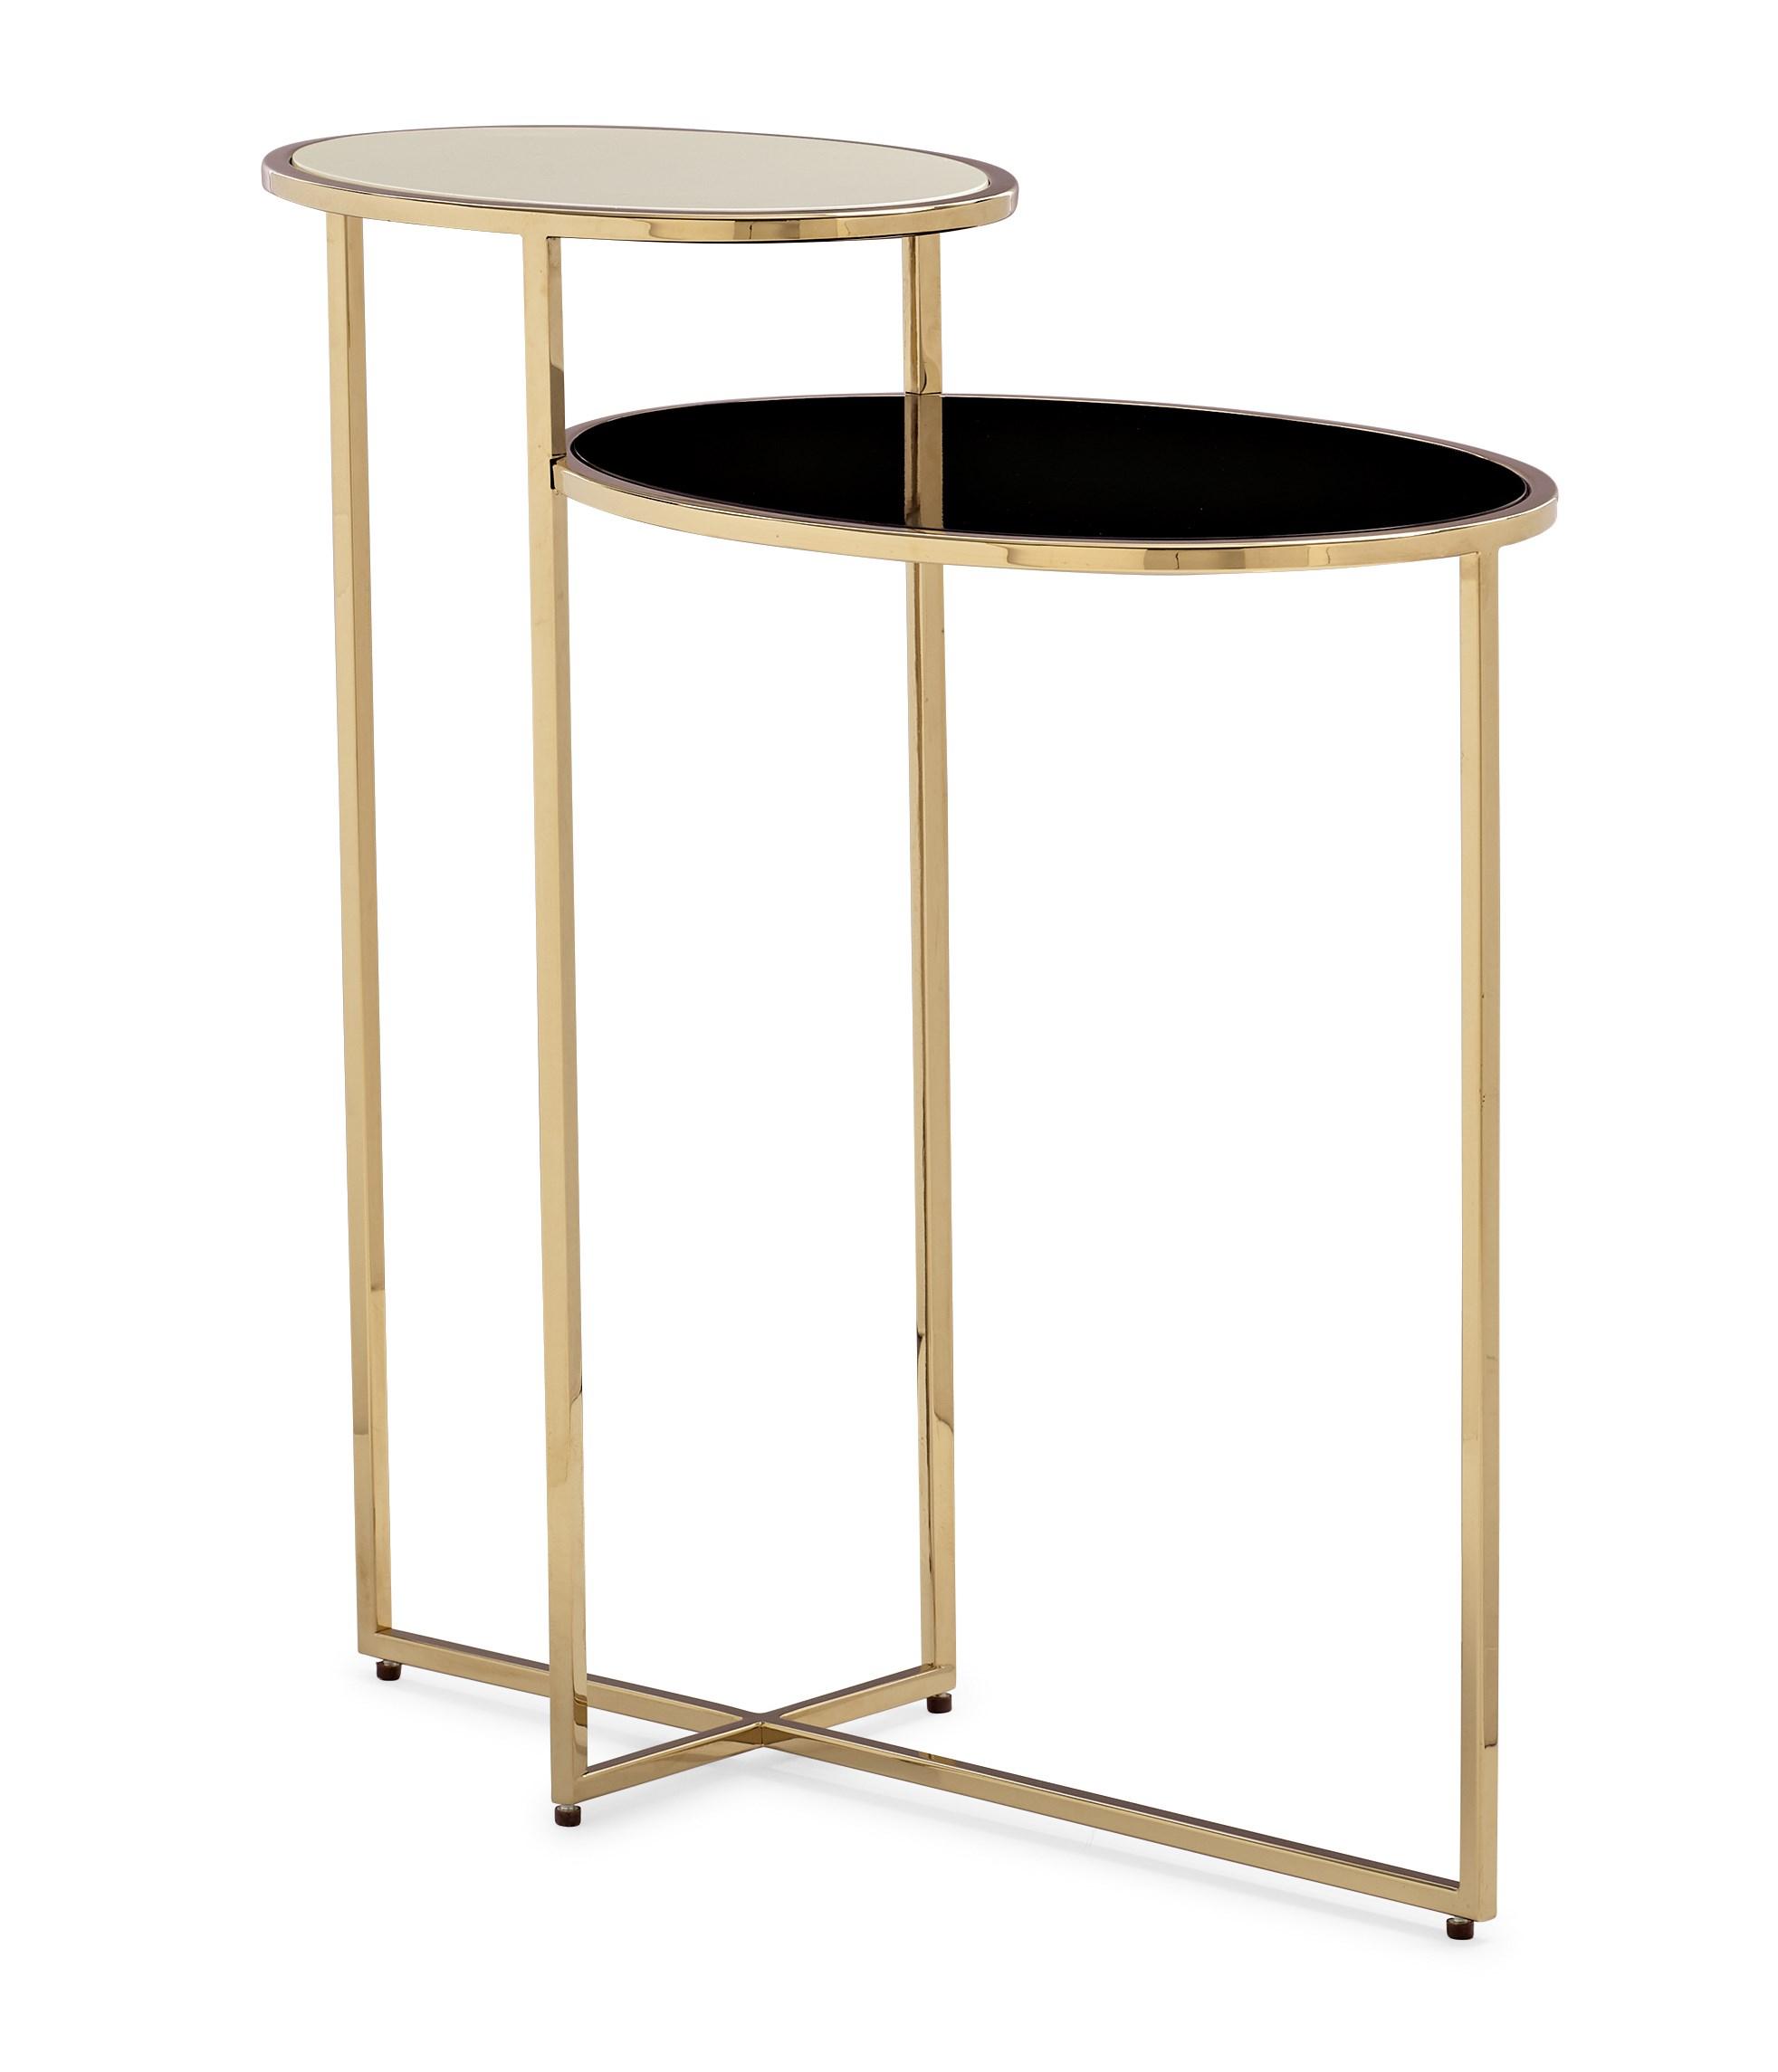 Contemporary End Table THE LADIES SIDE SIG-419-427 in Cream, Gold, Black 